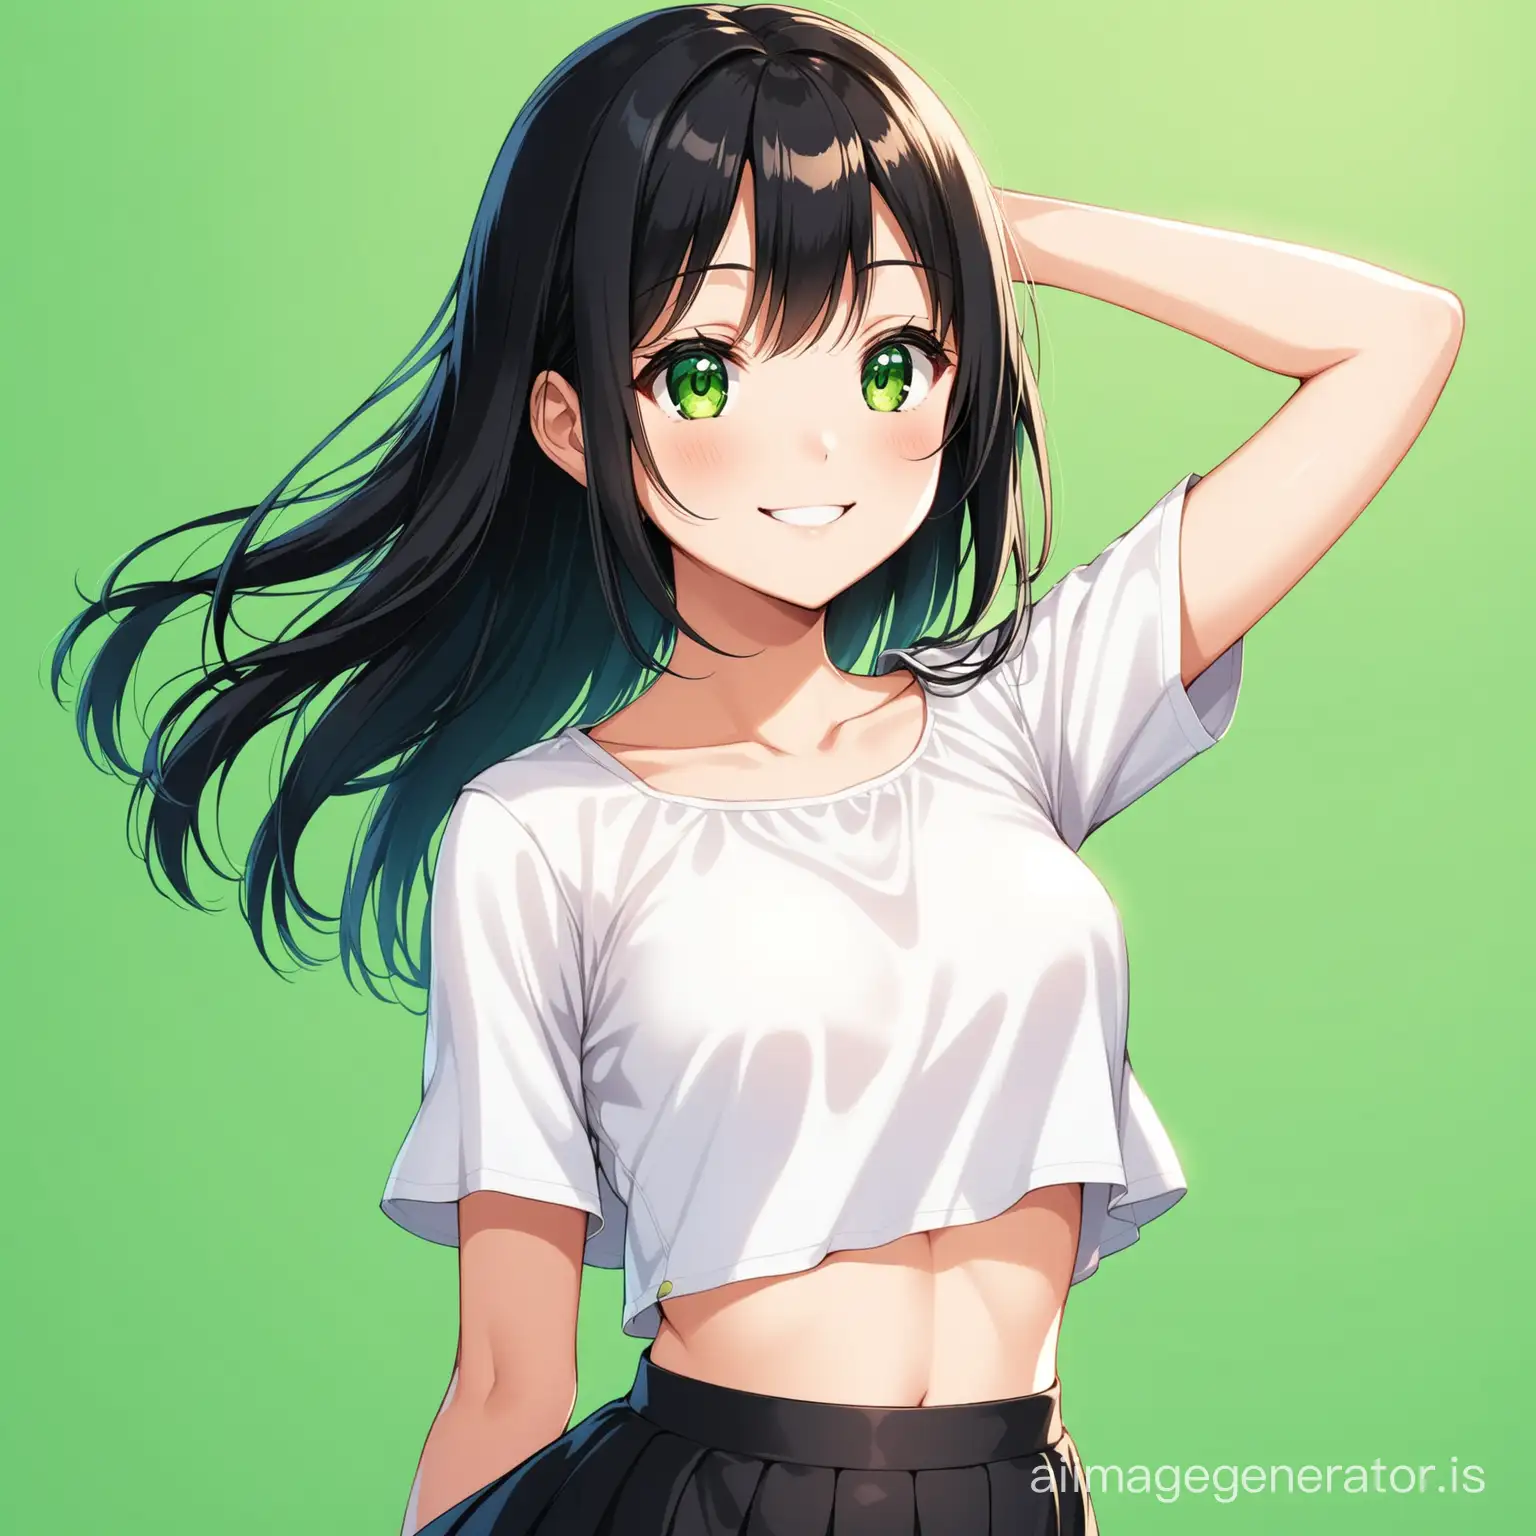 Smiling-Anime-Girl-in-Black-Skirt-and-White-Blouse-Top-against-Green-Background